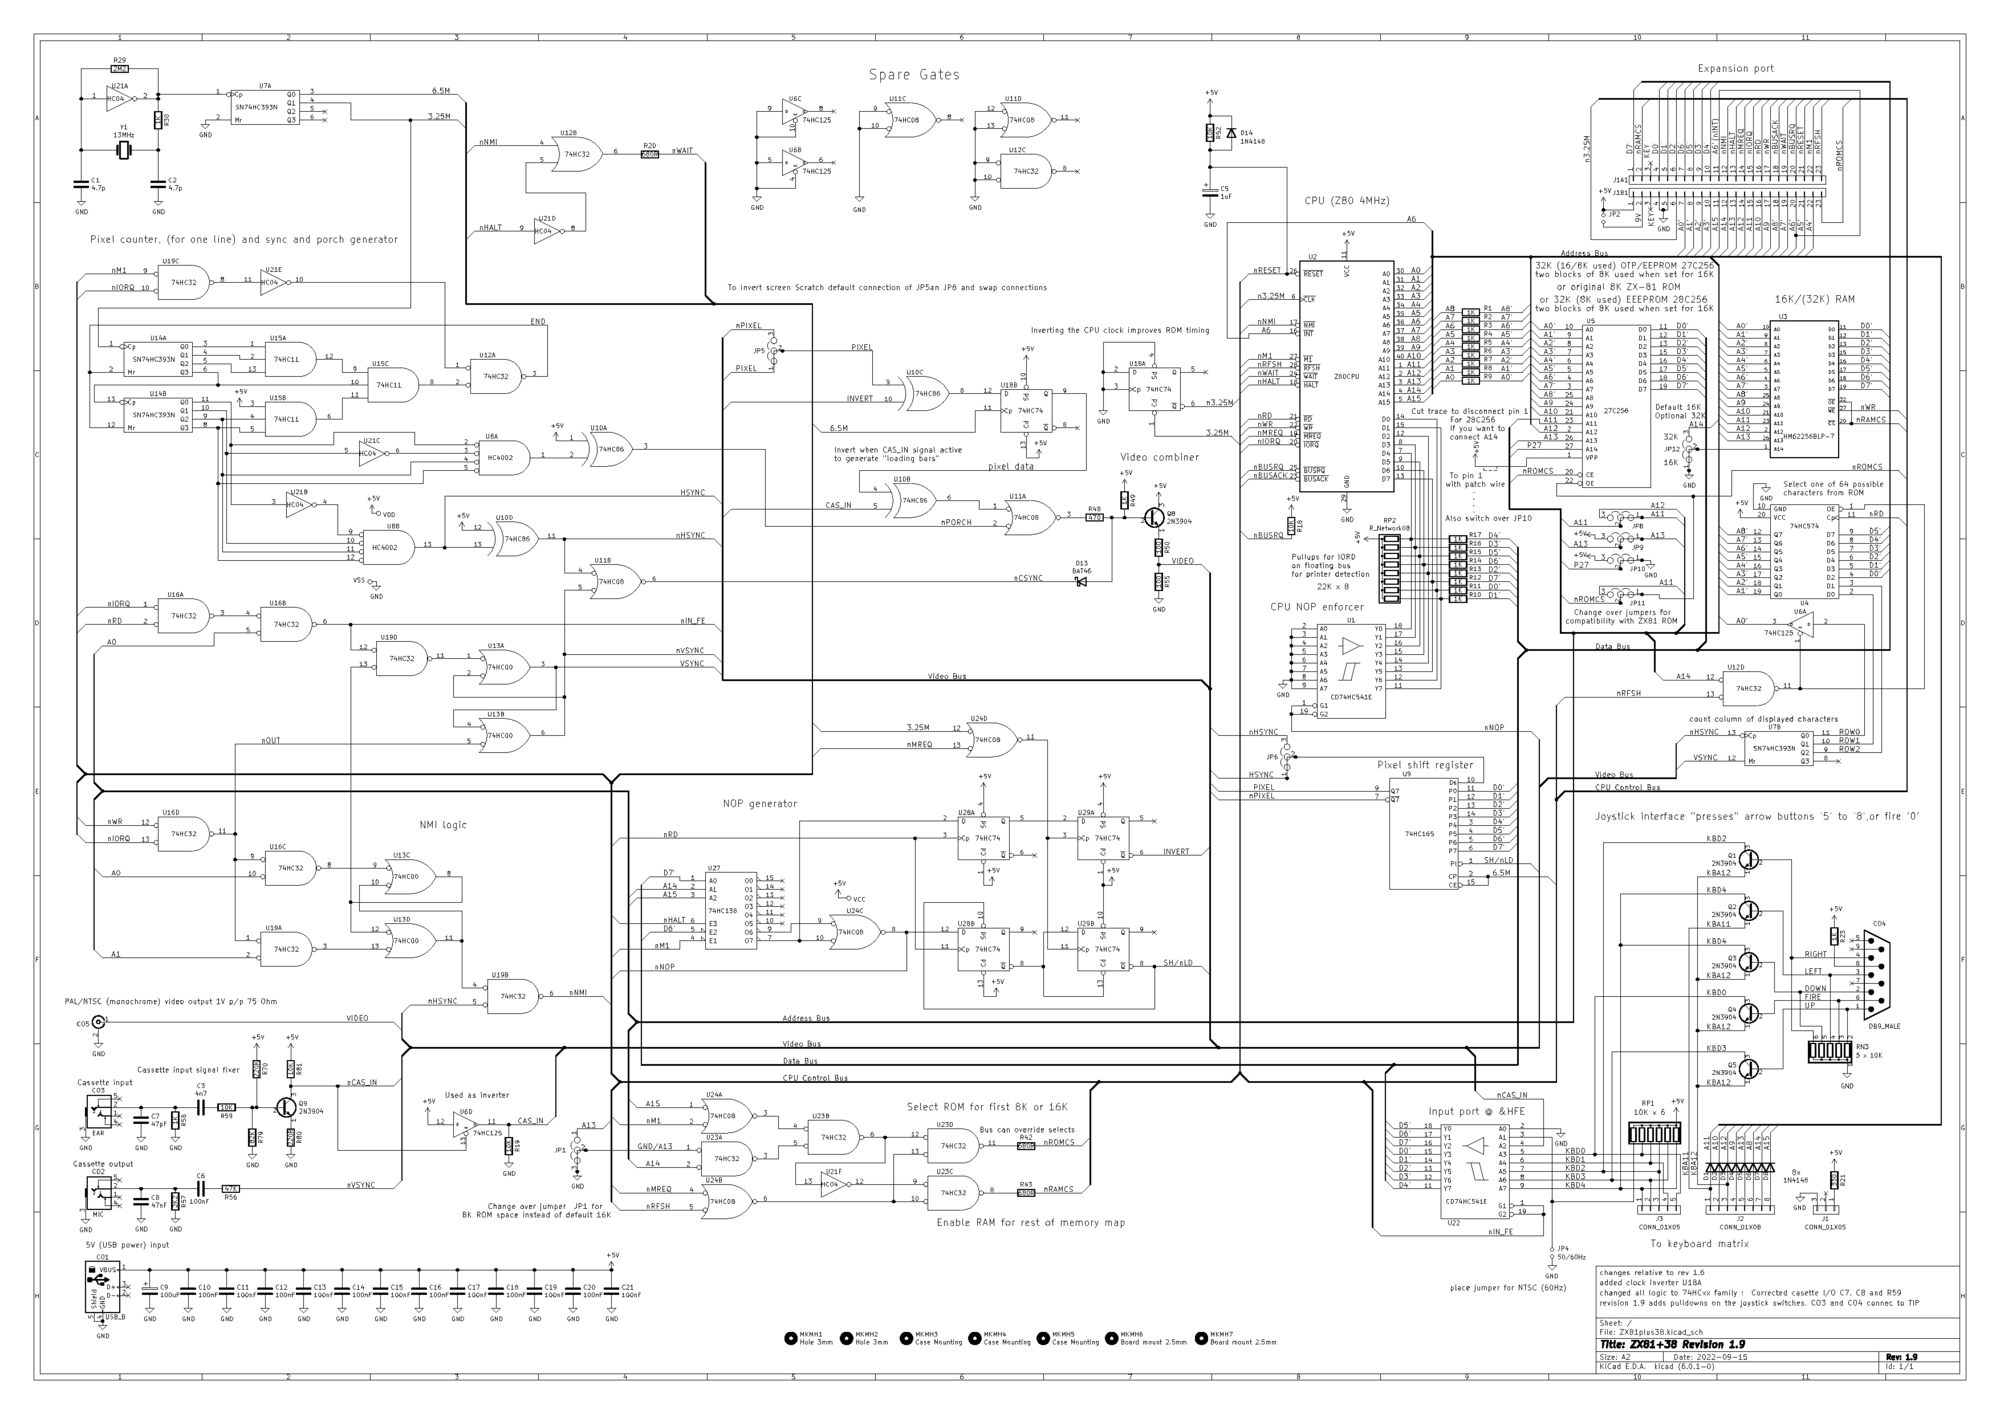 ZX81plus38 revision 1.9 schematic.png